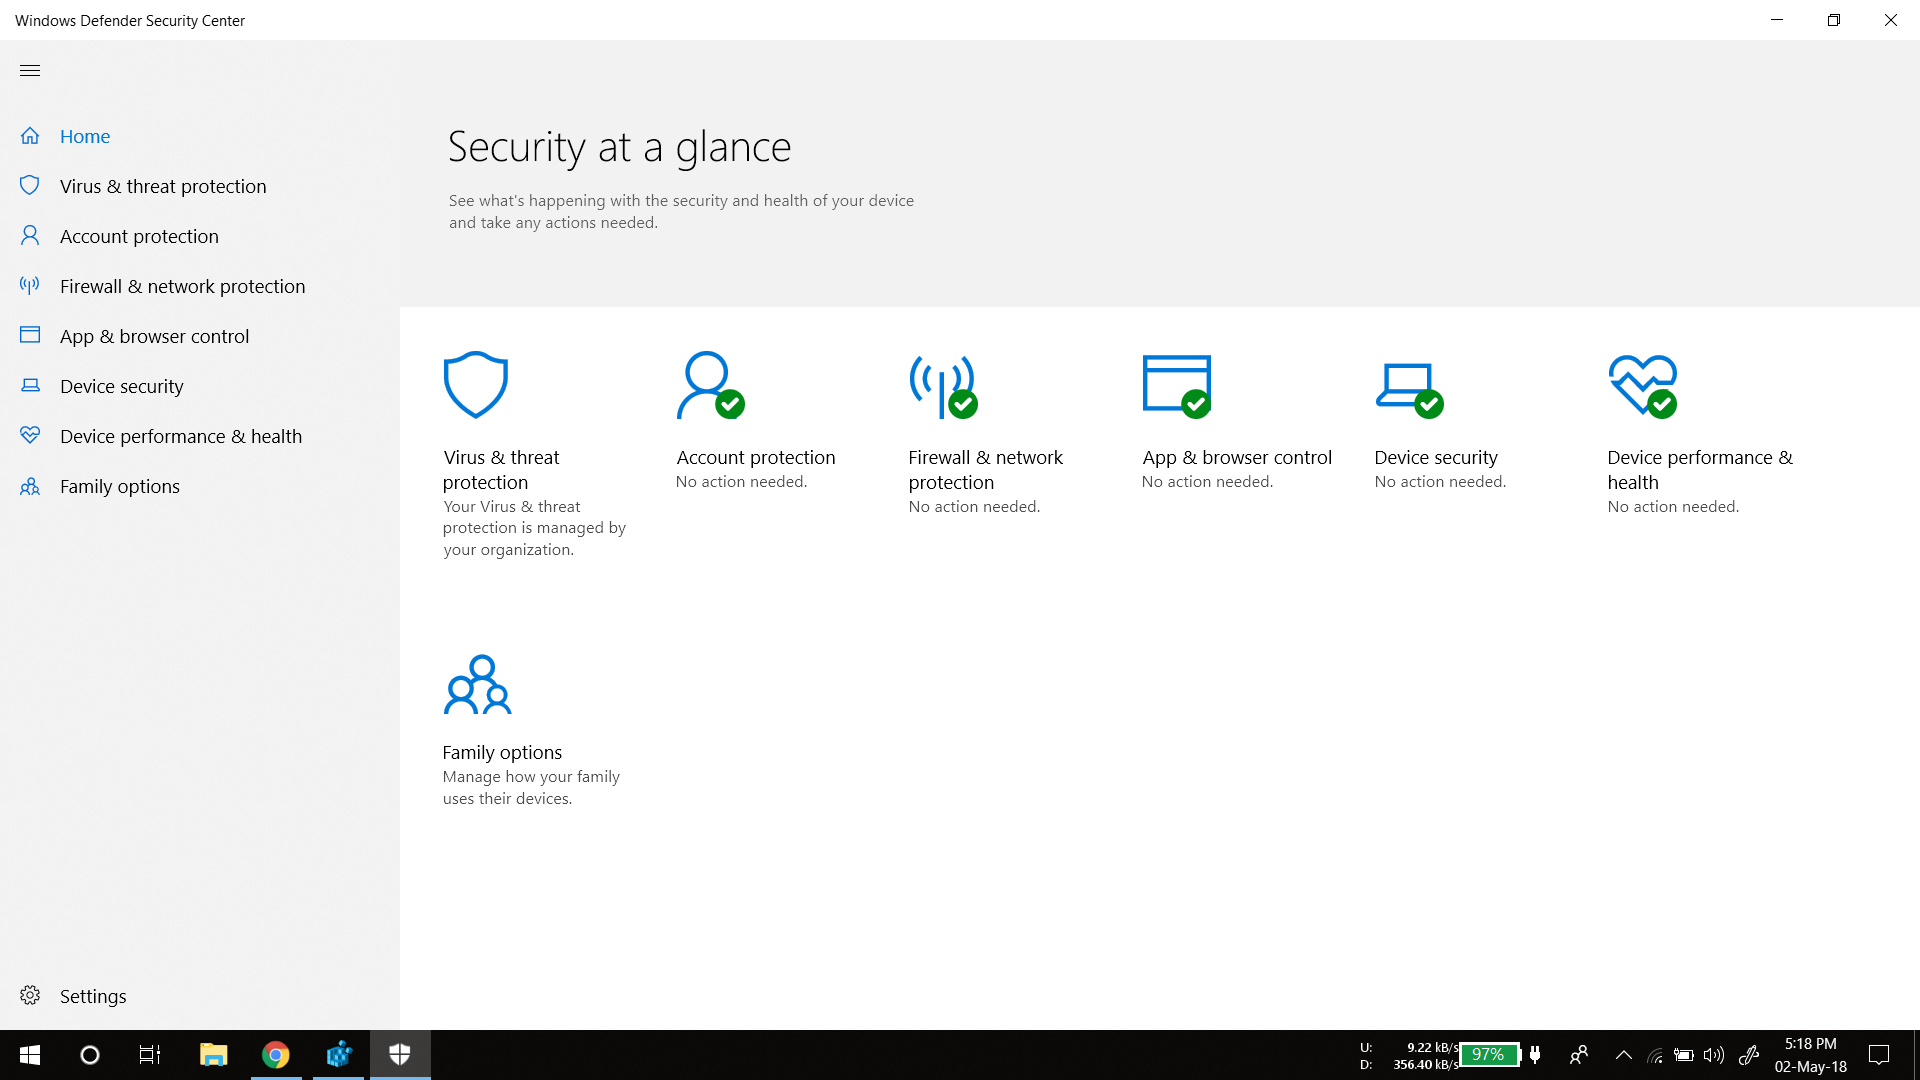 windows defender says my virus and threat protection is managed by my organization, how do... 7716a124-dc9e-466d-a71e-36c5ce7897c9?upload=true.png